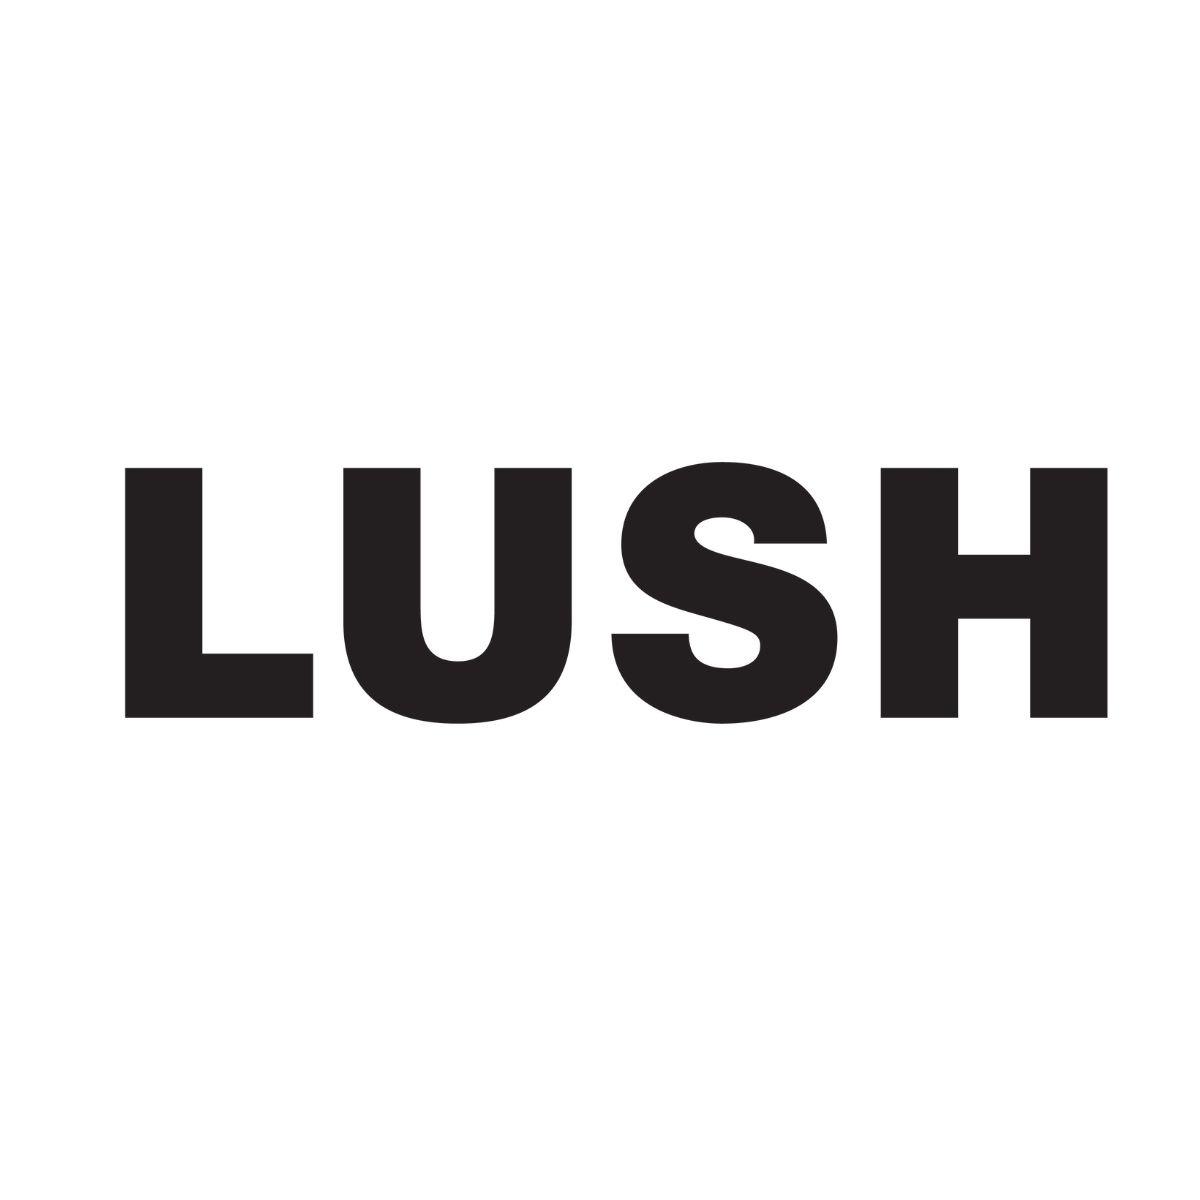 LUSH Cosmetics Rouse Hill - Permanently Closed - Sydney, NSW 2155 - 0426 795 015 | ShowMeLocal.com